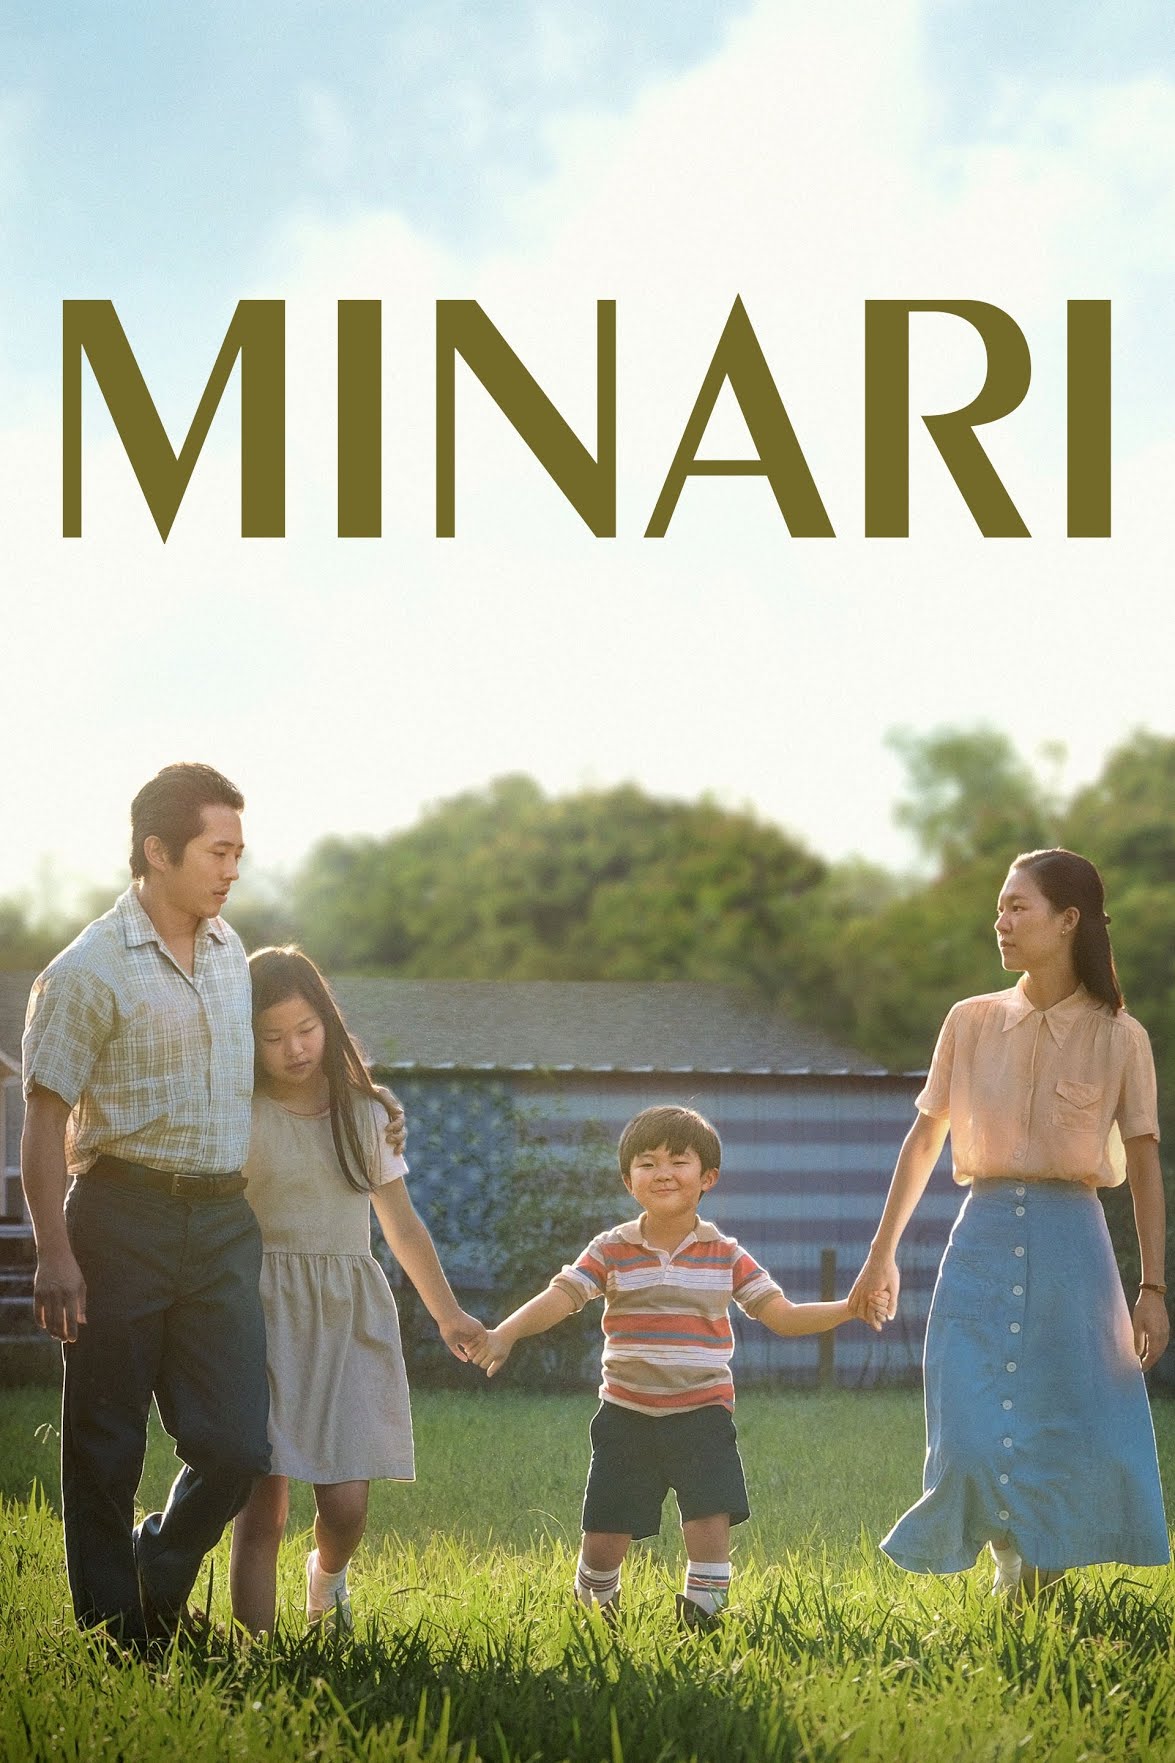 Image of the Movie poster featuring a family. Father, mother, young girl and young boy. 